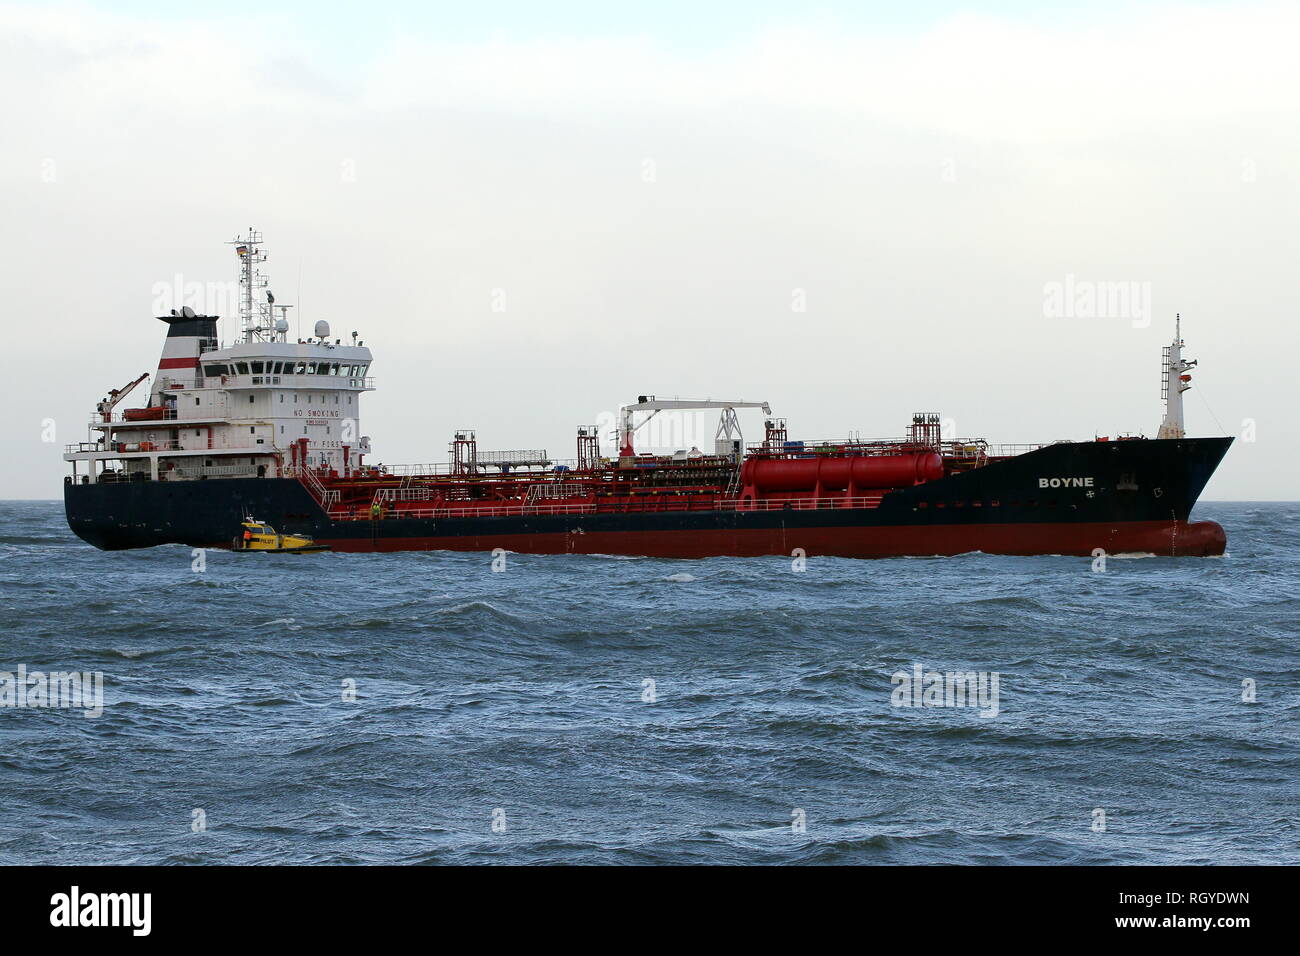 The tanker Boyne happened on 1 January 2019 Cuxhaven and continues to Hamburg. Stock Photo